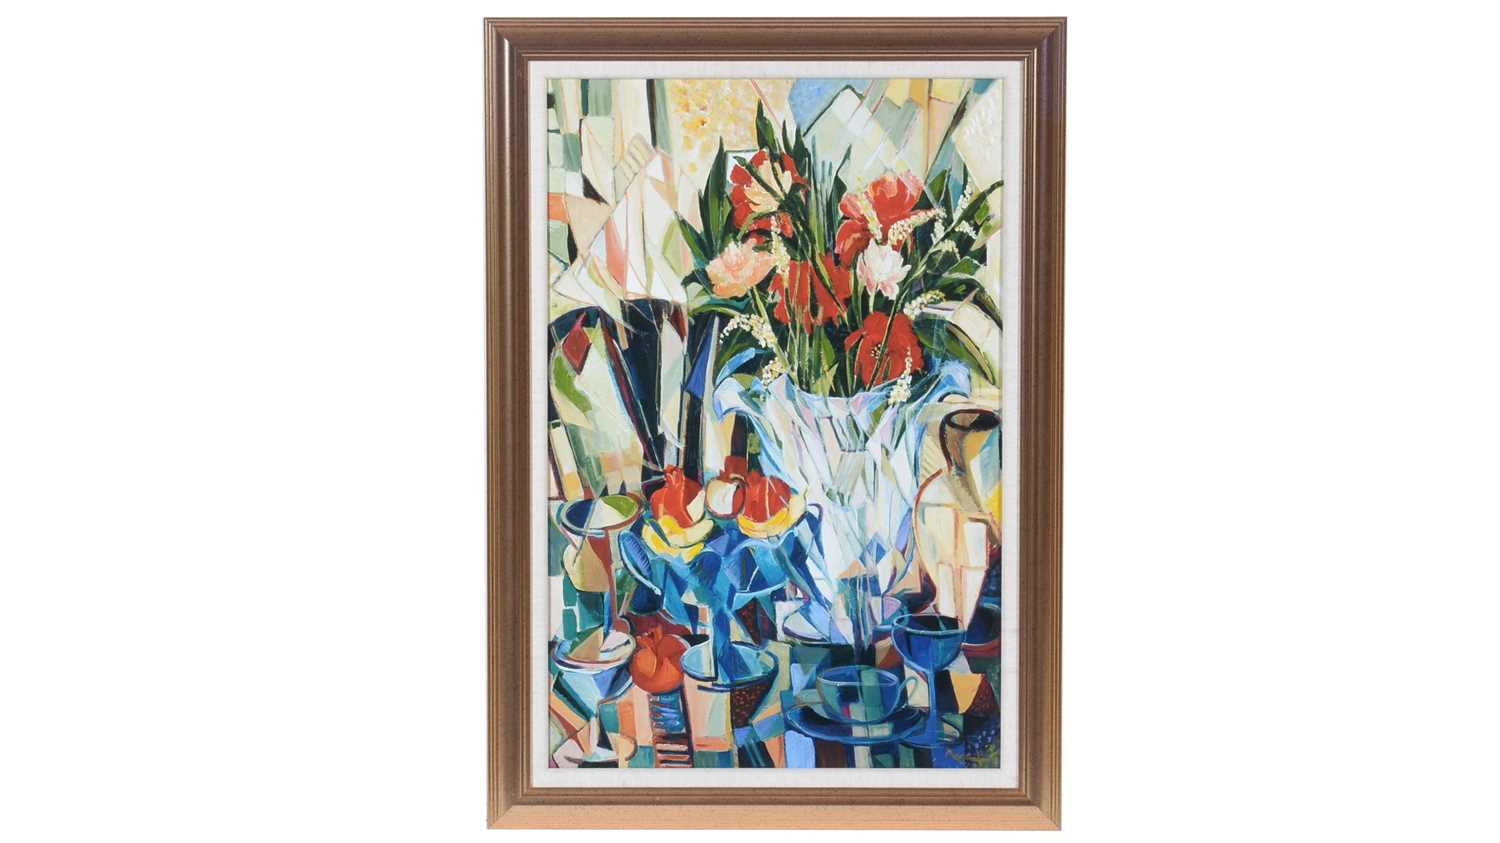 Lot 130 - Sadegh Aref - Cubist Still Life with Poppies and Pomegranates | giclee